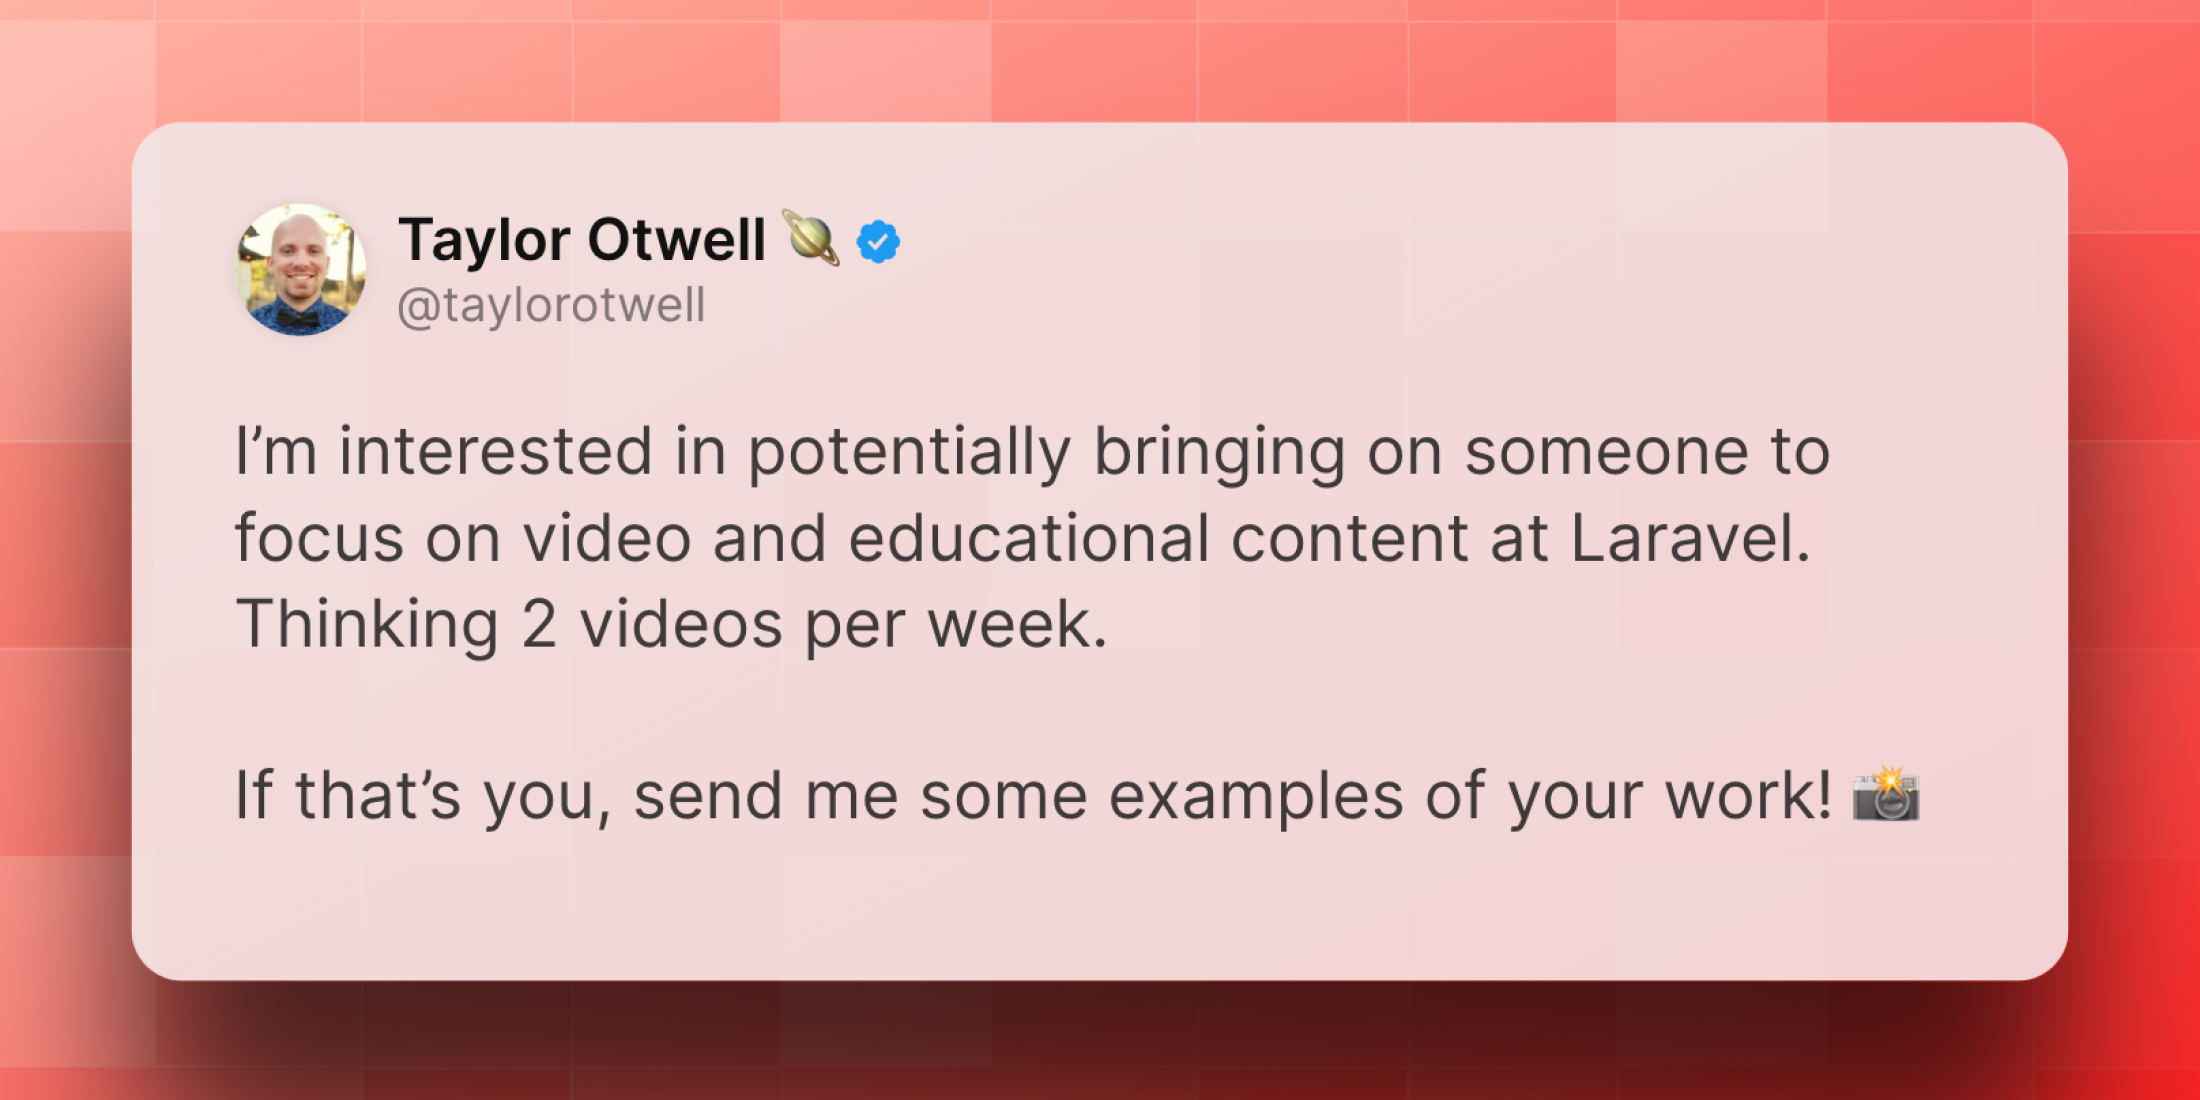 Laravel is looking to hire for video and educational content image